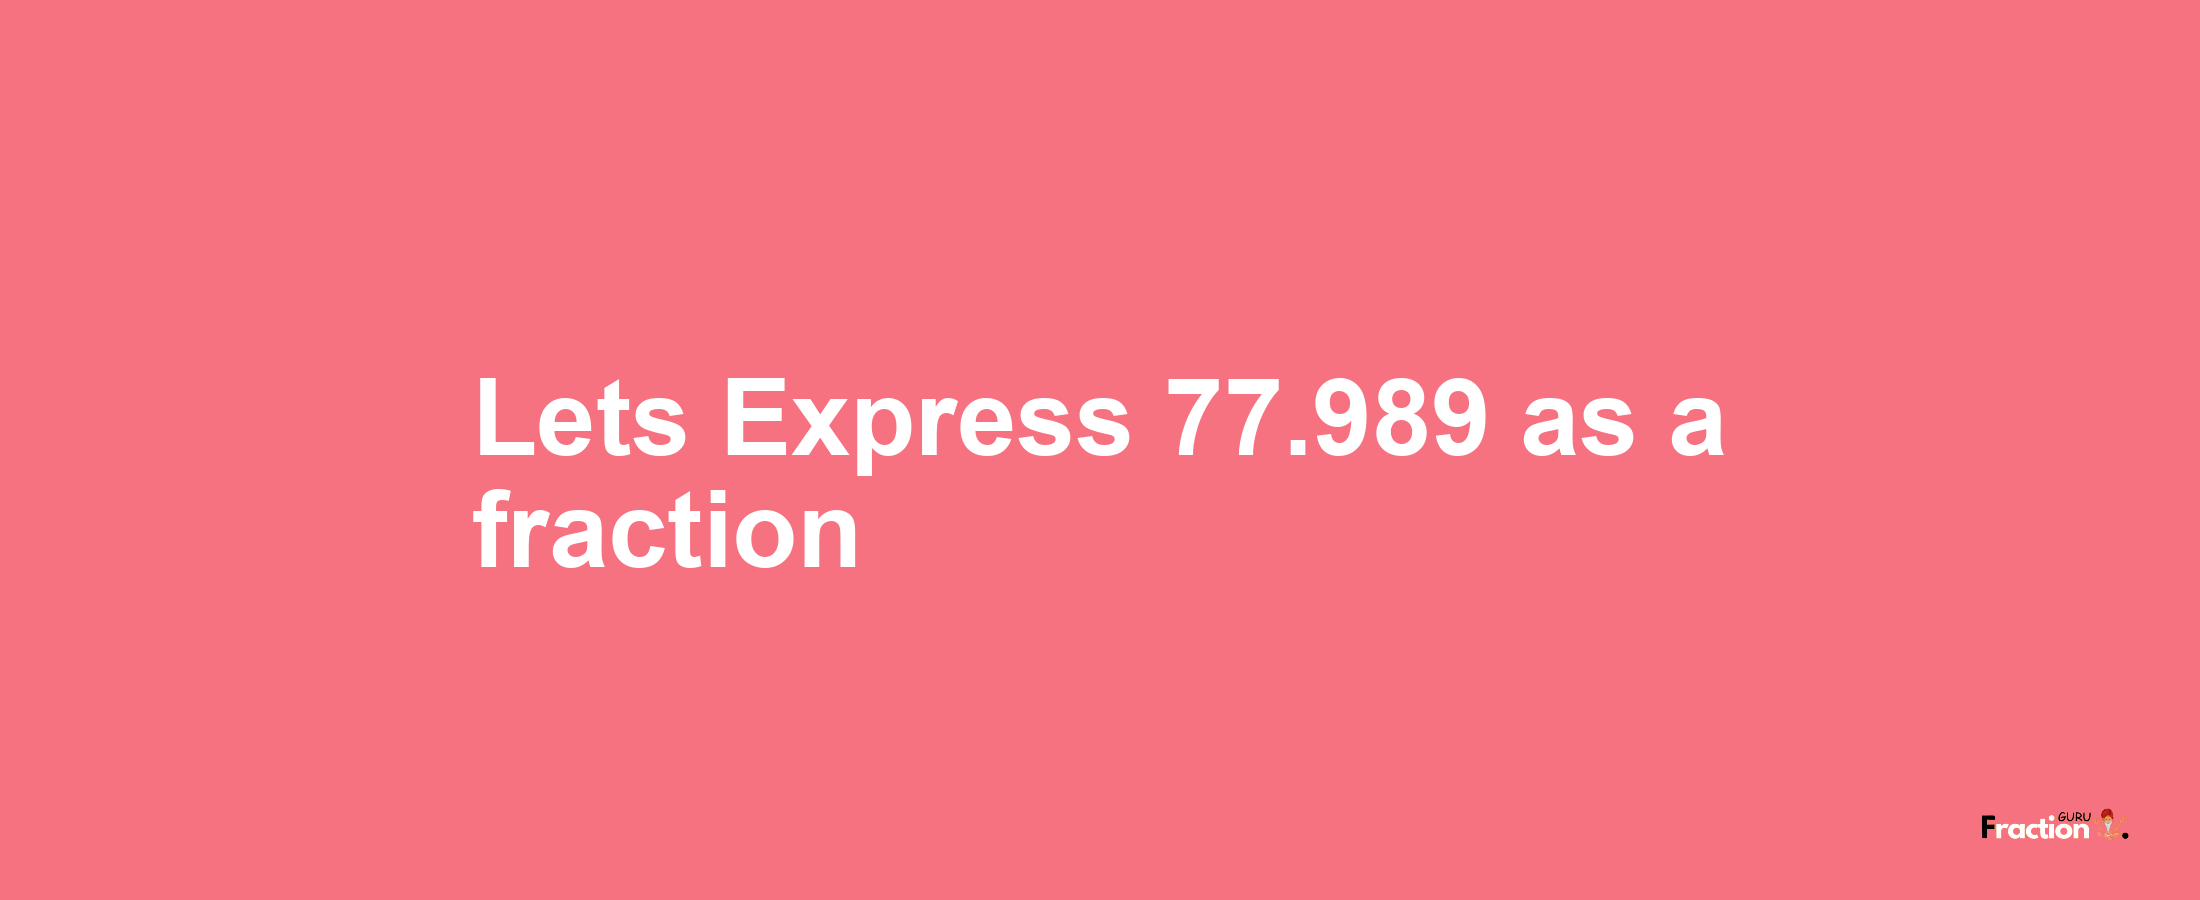 Lets Express 77.989 as afraction